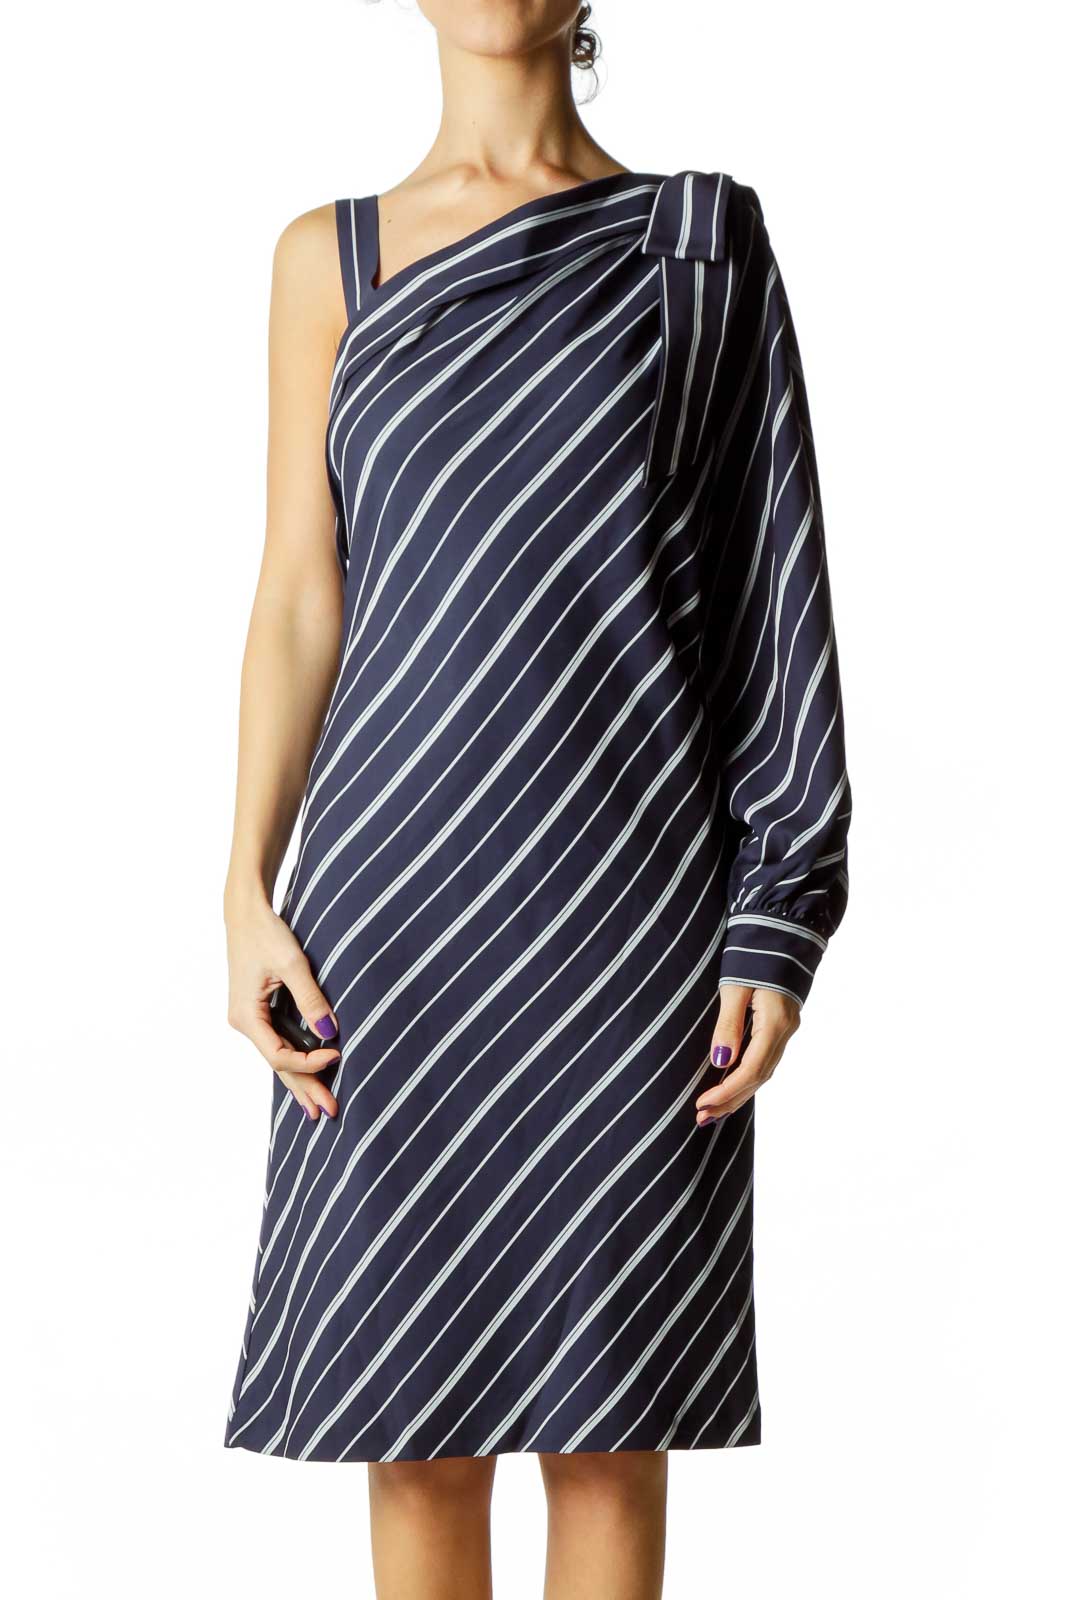 Navy & White Striped Dress Front